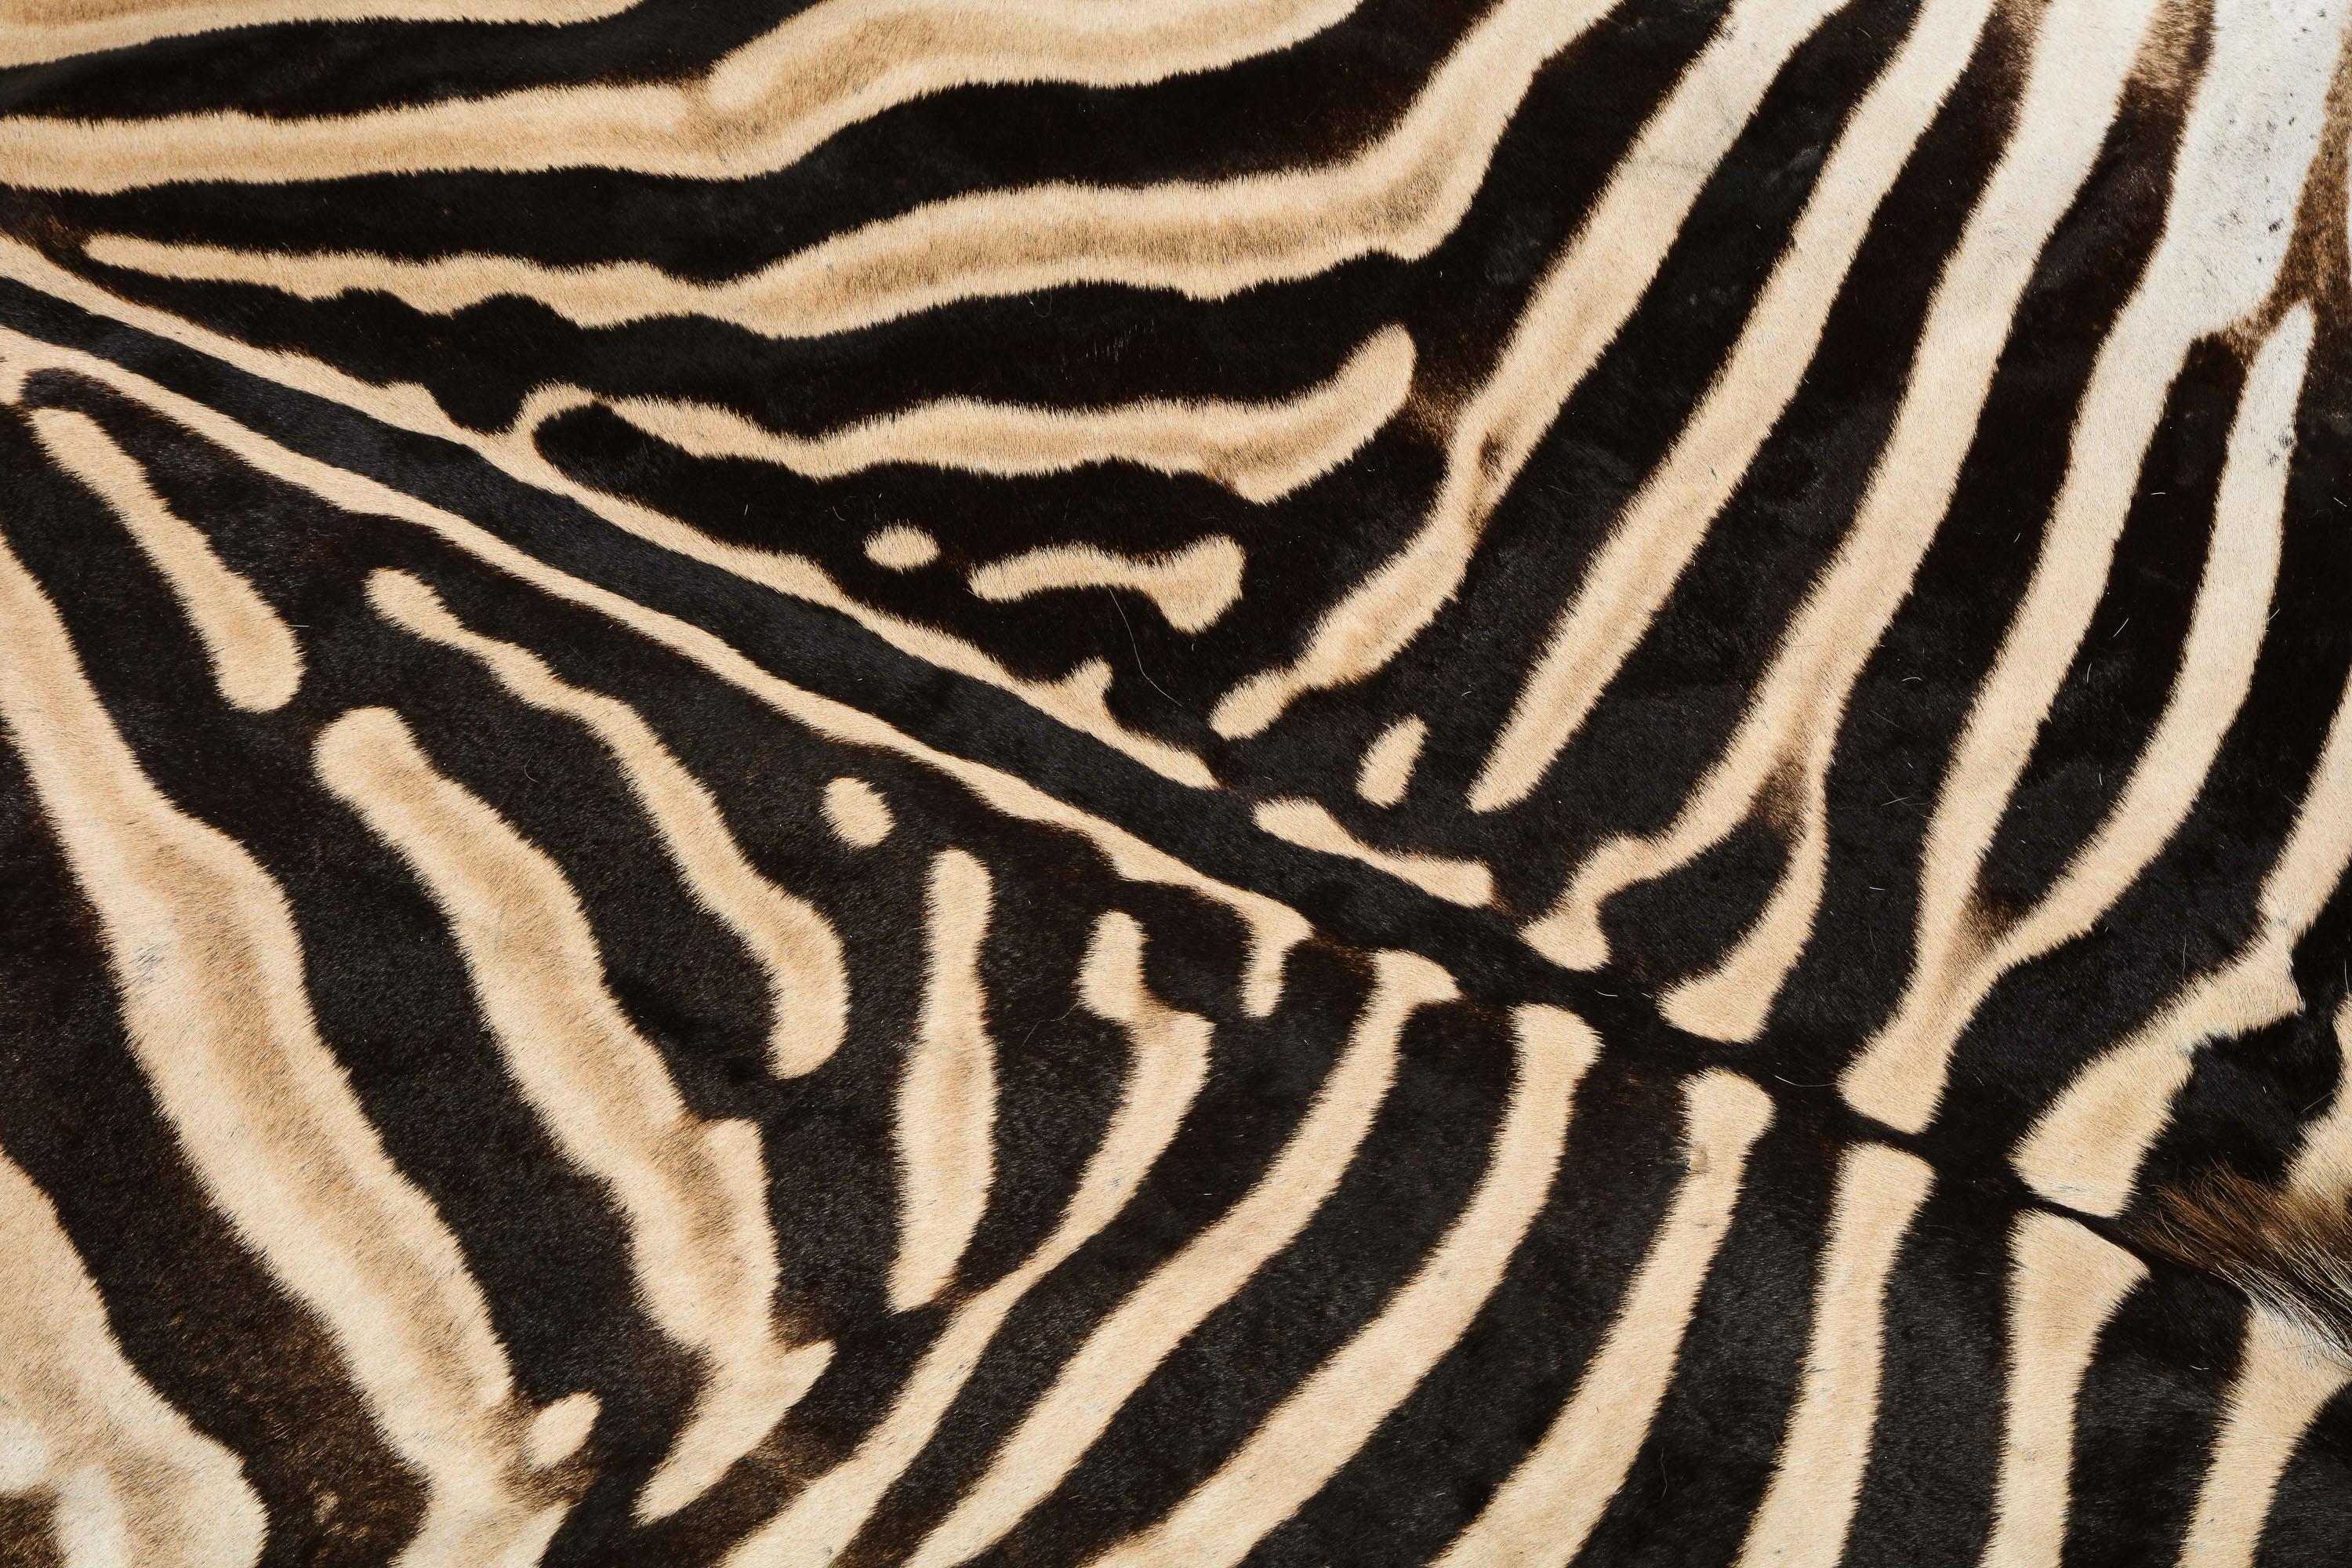 South African Zebra Rug, South Africa, Wool Felt Backed with Leather Trim, New Hide, In Stock For Sale